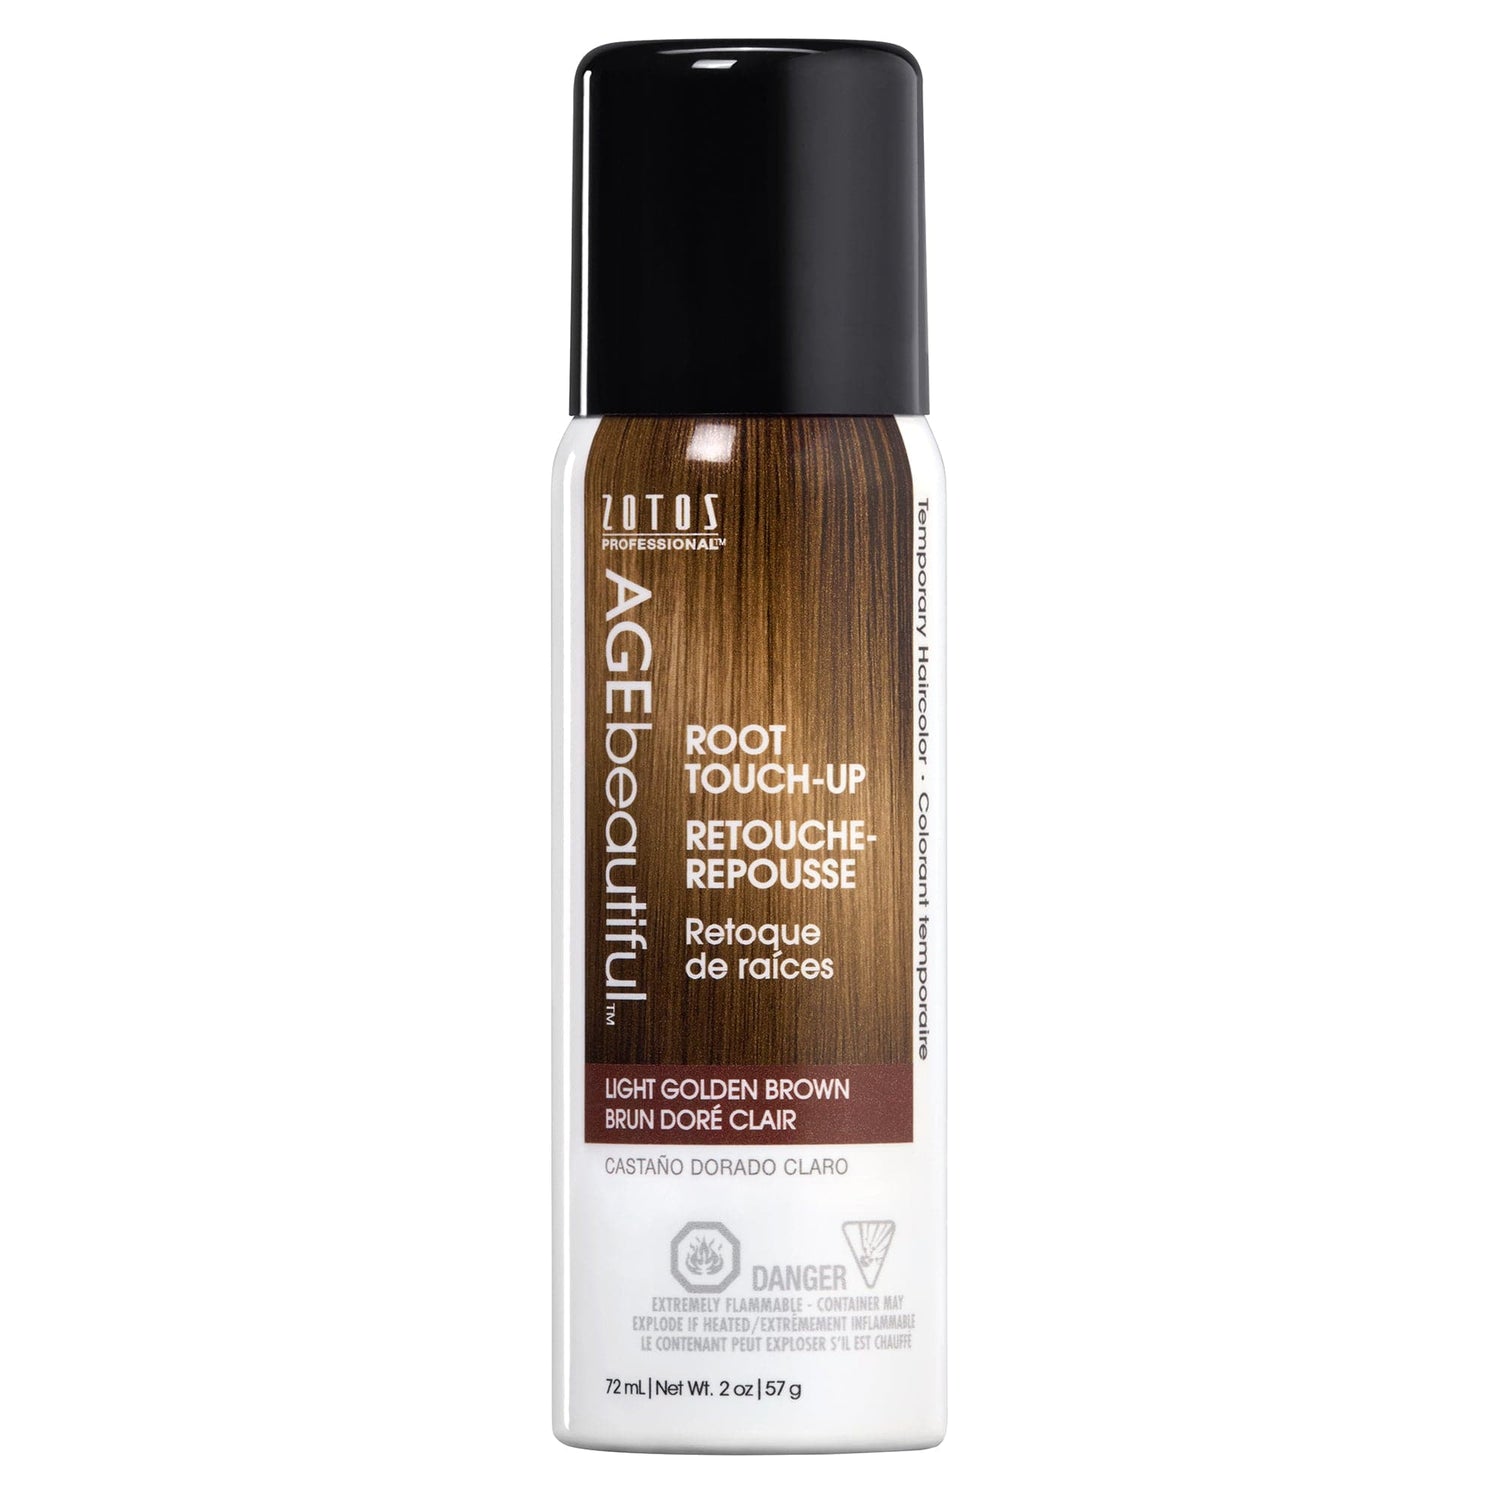 AGEbeautiful® Temporary Root Touch-Up  - Light Golden Brown